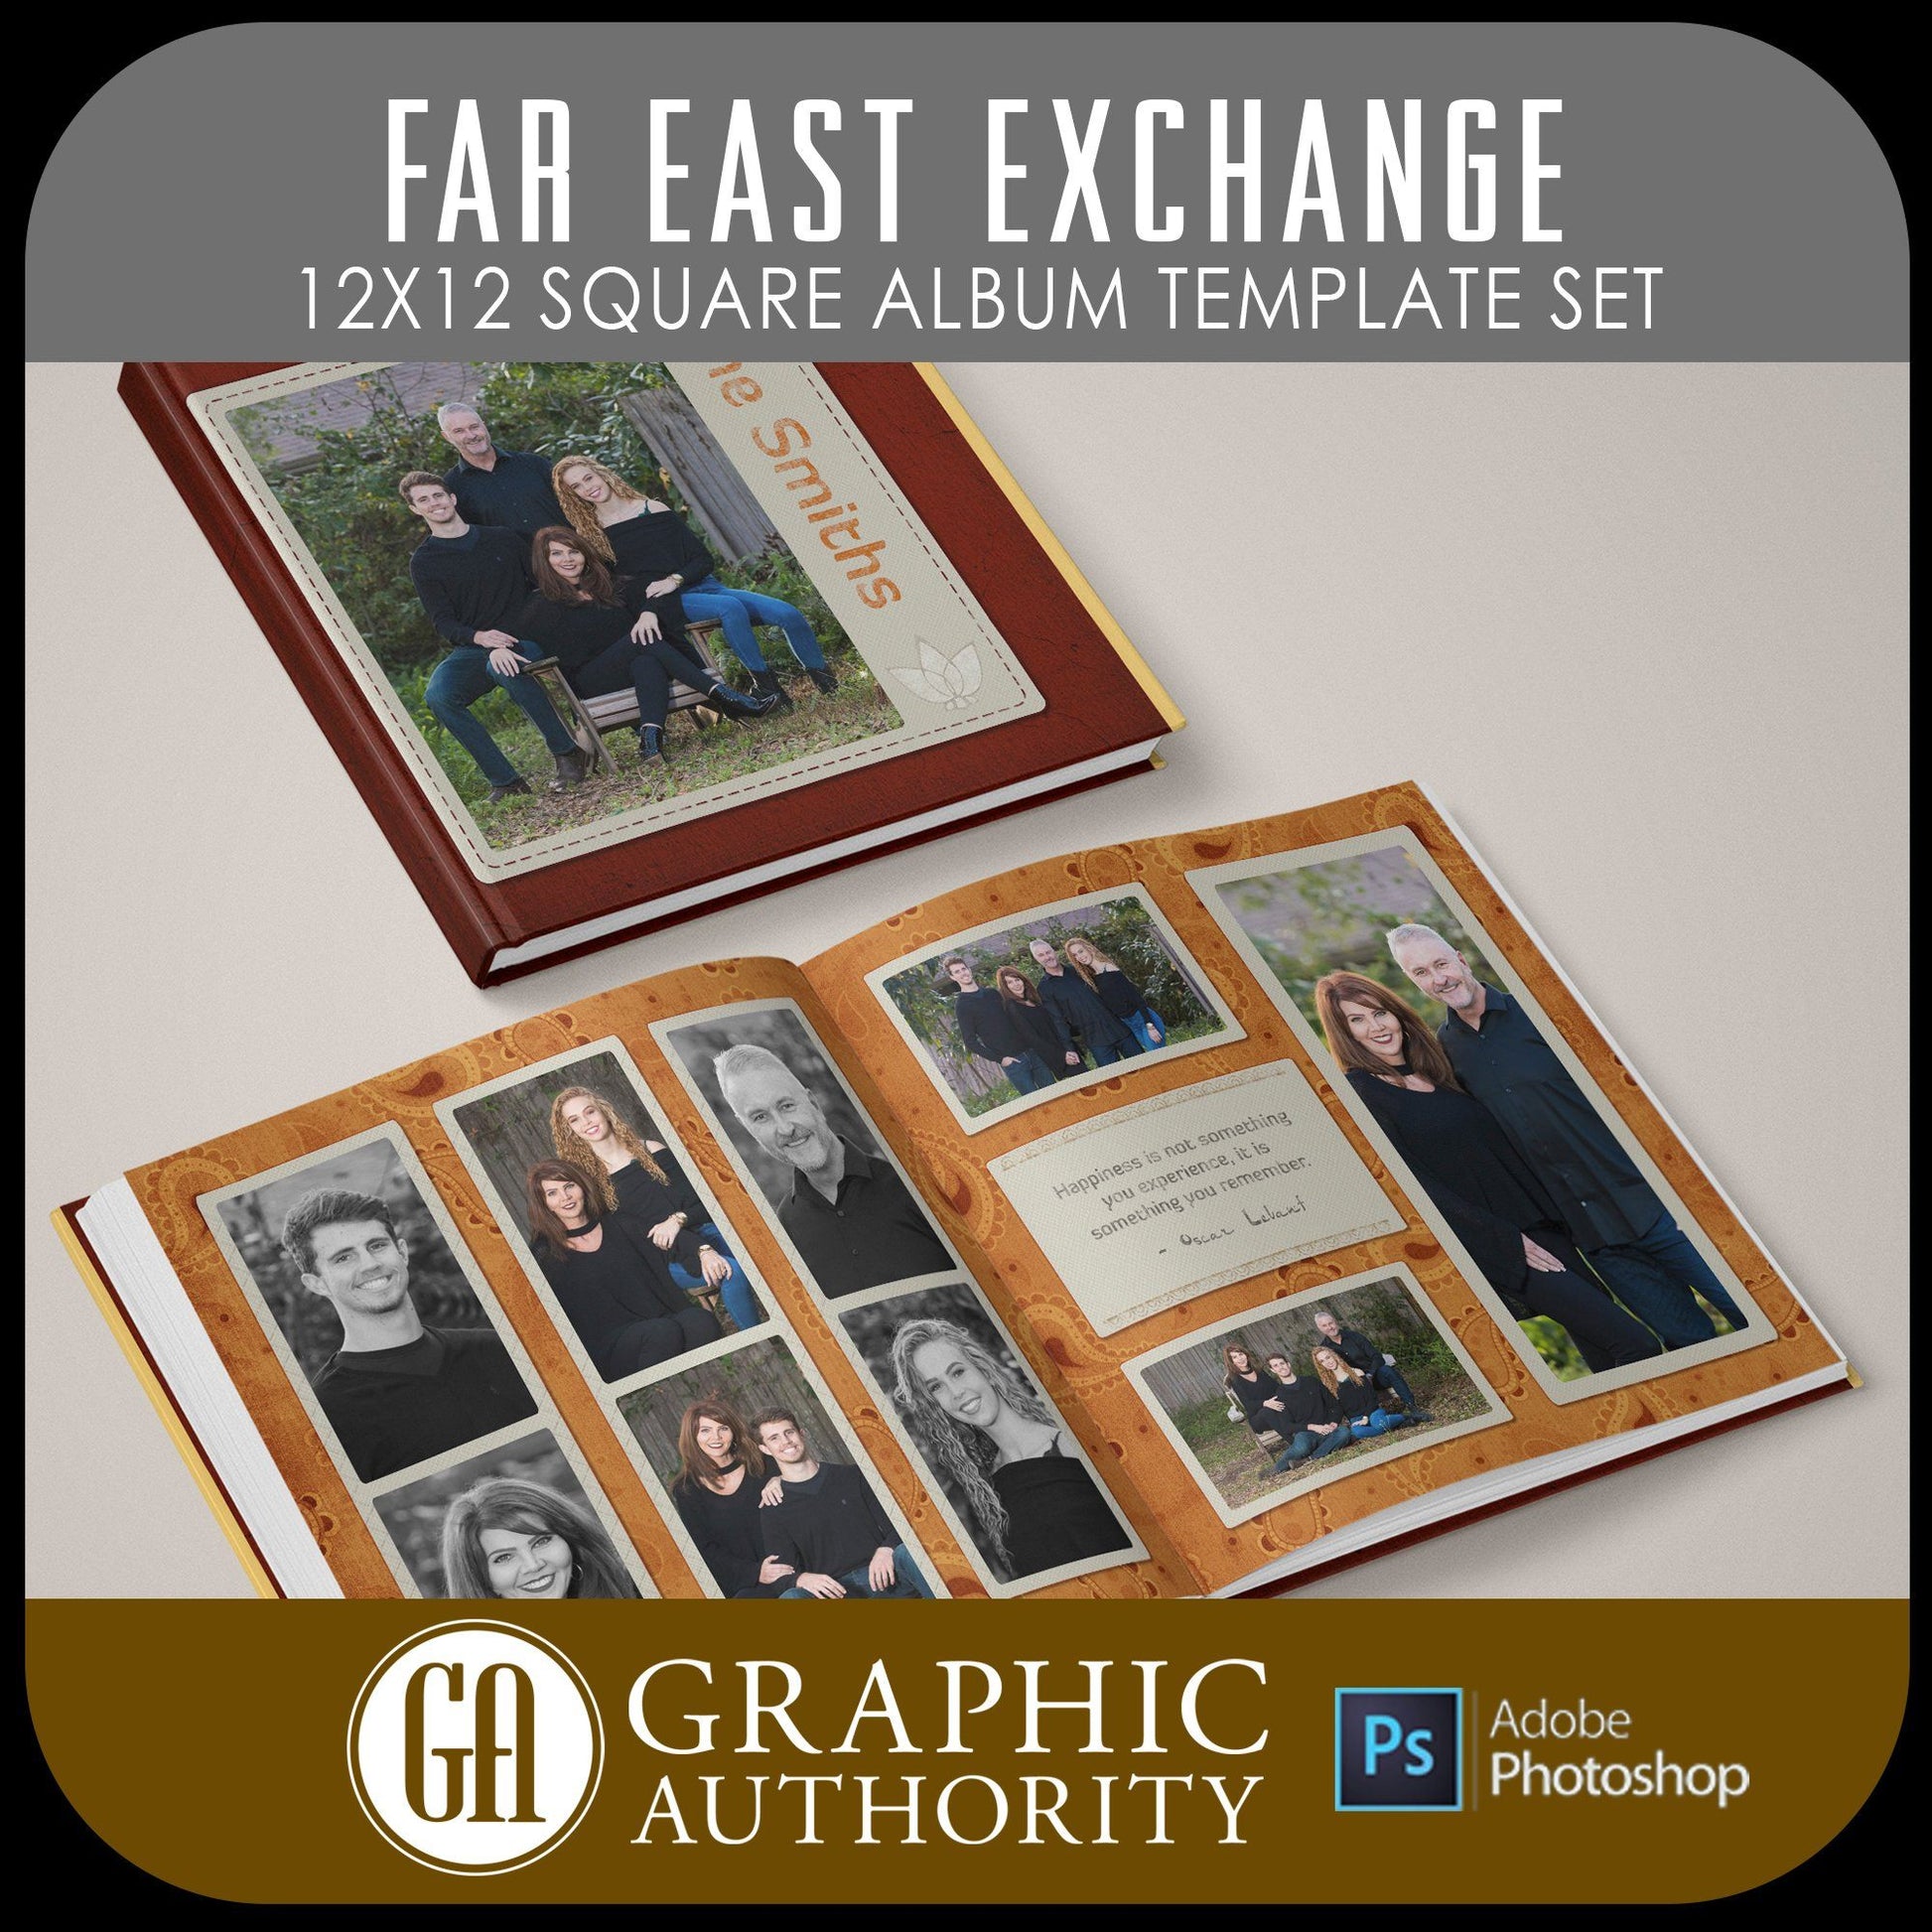 Culture Chic - Far East Exchange - 12x24 - Album Spreads-Photoshop Template - Graphic Authority